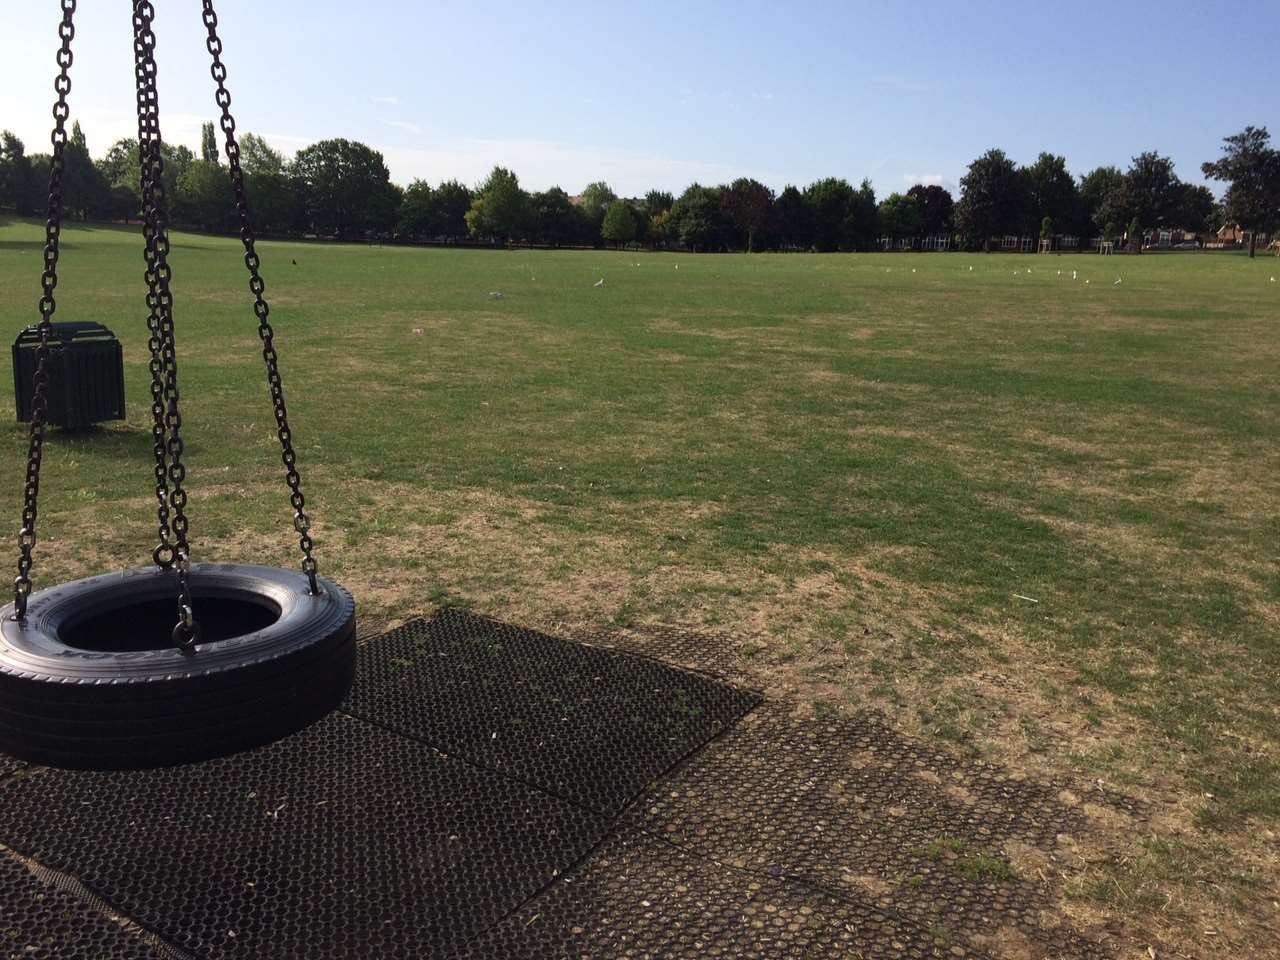 The tyre swings at Woodlands Park in Gravesend